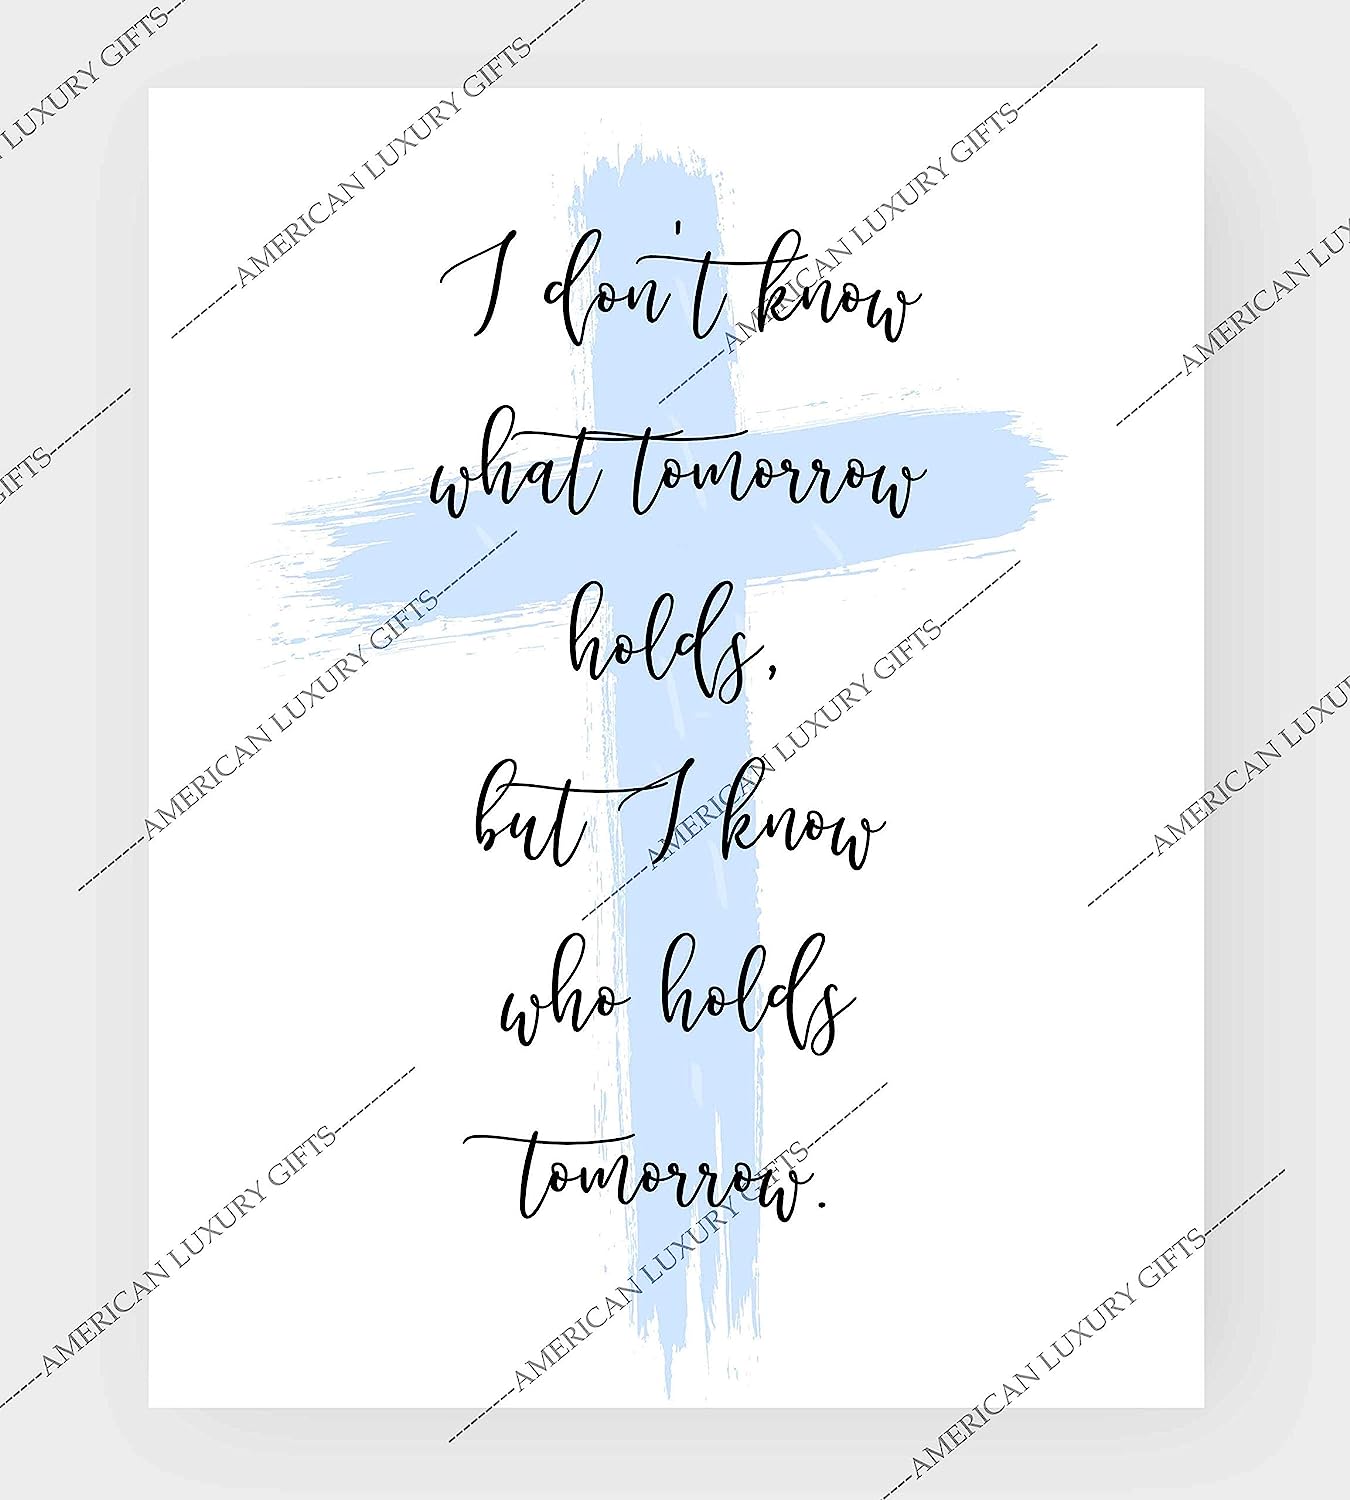 I Know Who Holds Tomorrow Inspirational Quotes Wall Art Decor -8 x 10" Christian Poster Print-Ready to Frame. Motivational Sign for Home-Office-Farmhouse-Church. Great Religious Gift of Faith!